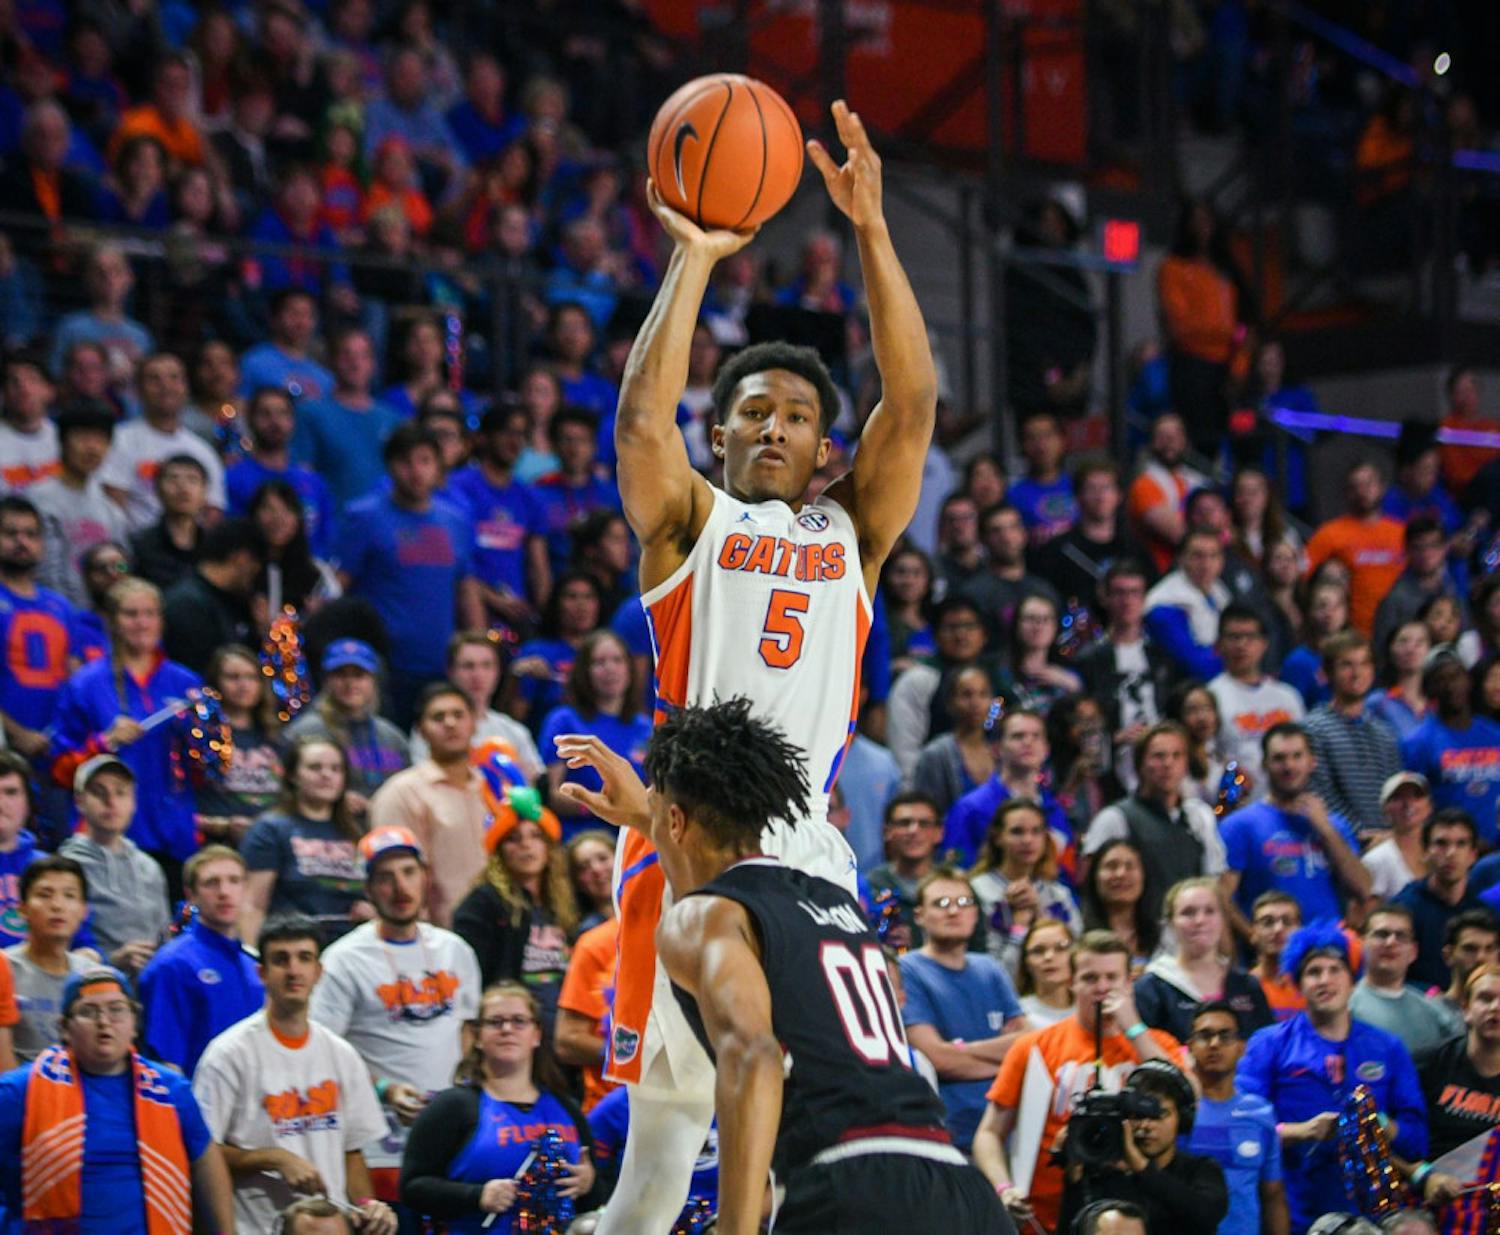 Senior guard KeVaughn Allen led the Gators in scoring with 13 points in their 62-52 win over Georgia on Saturday.